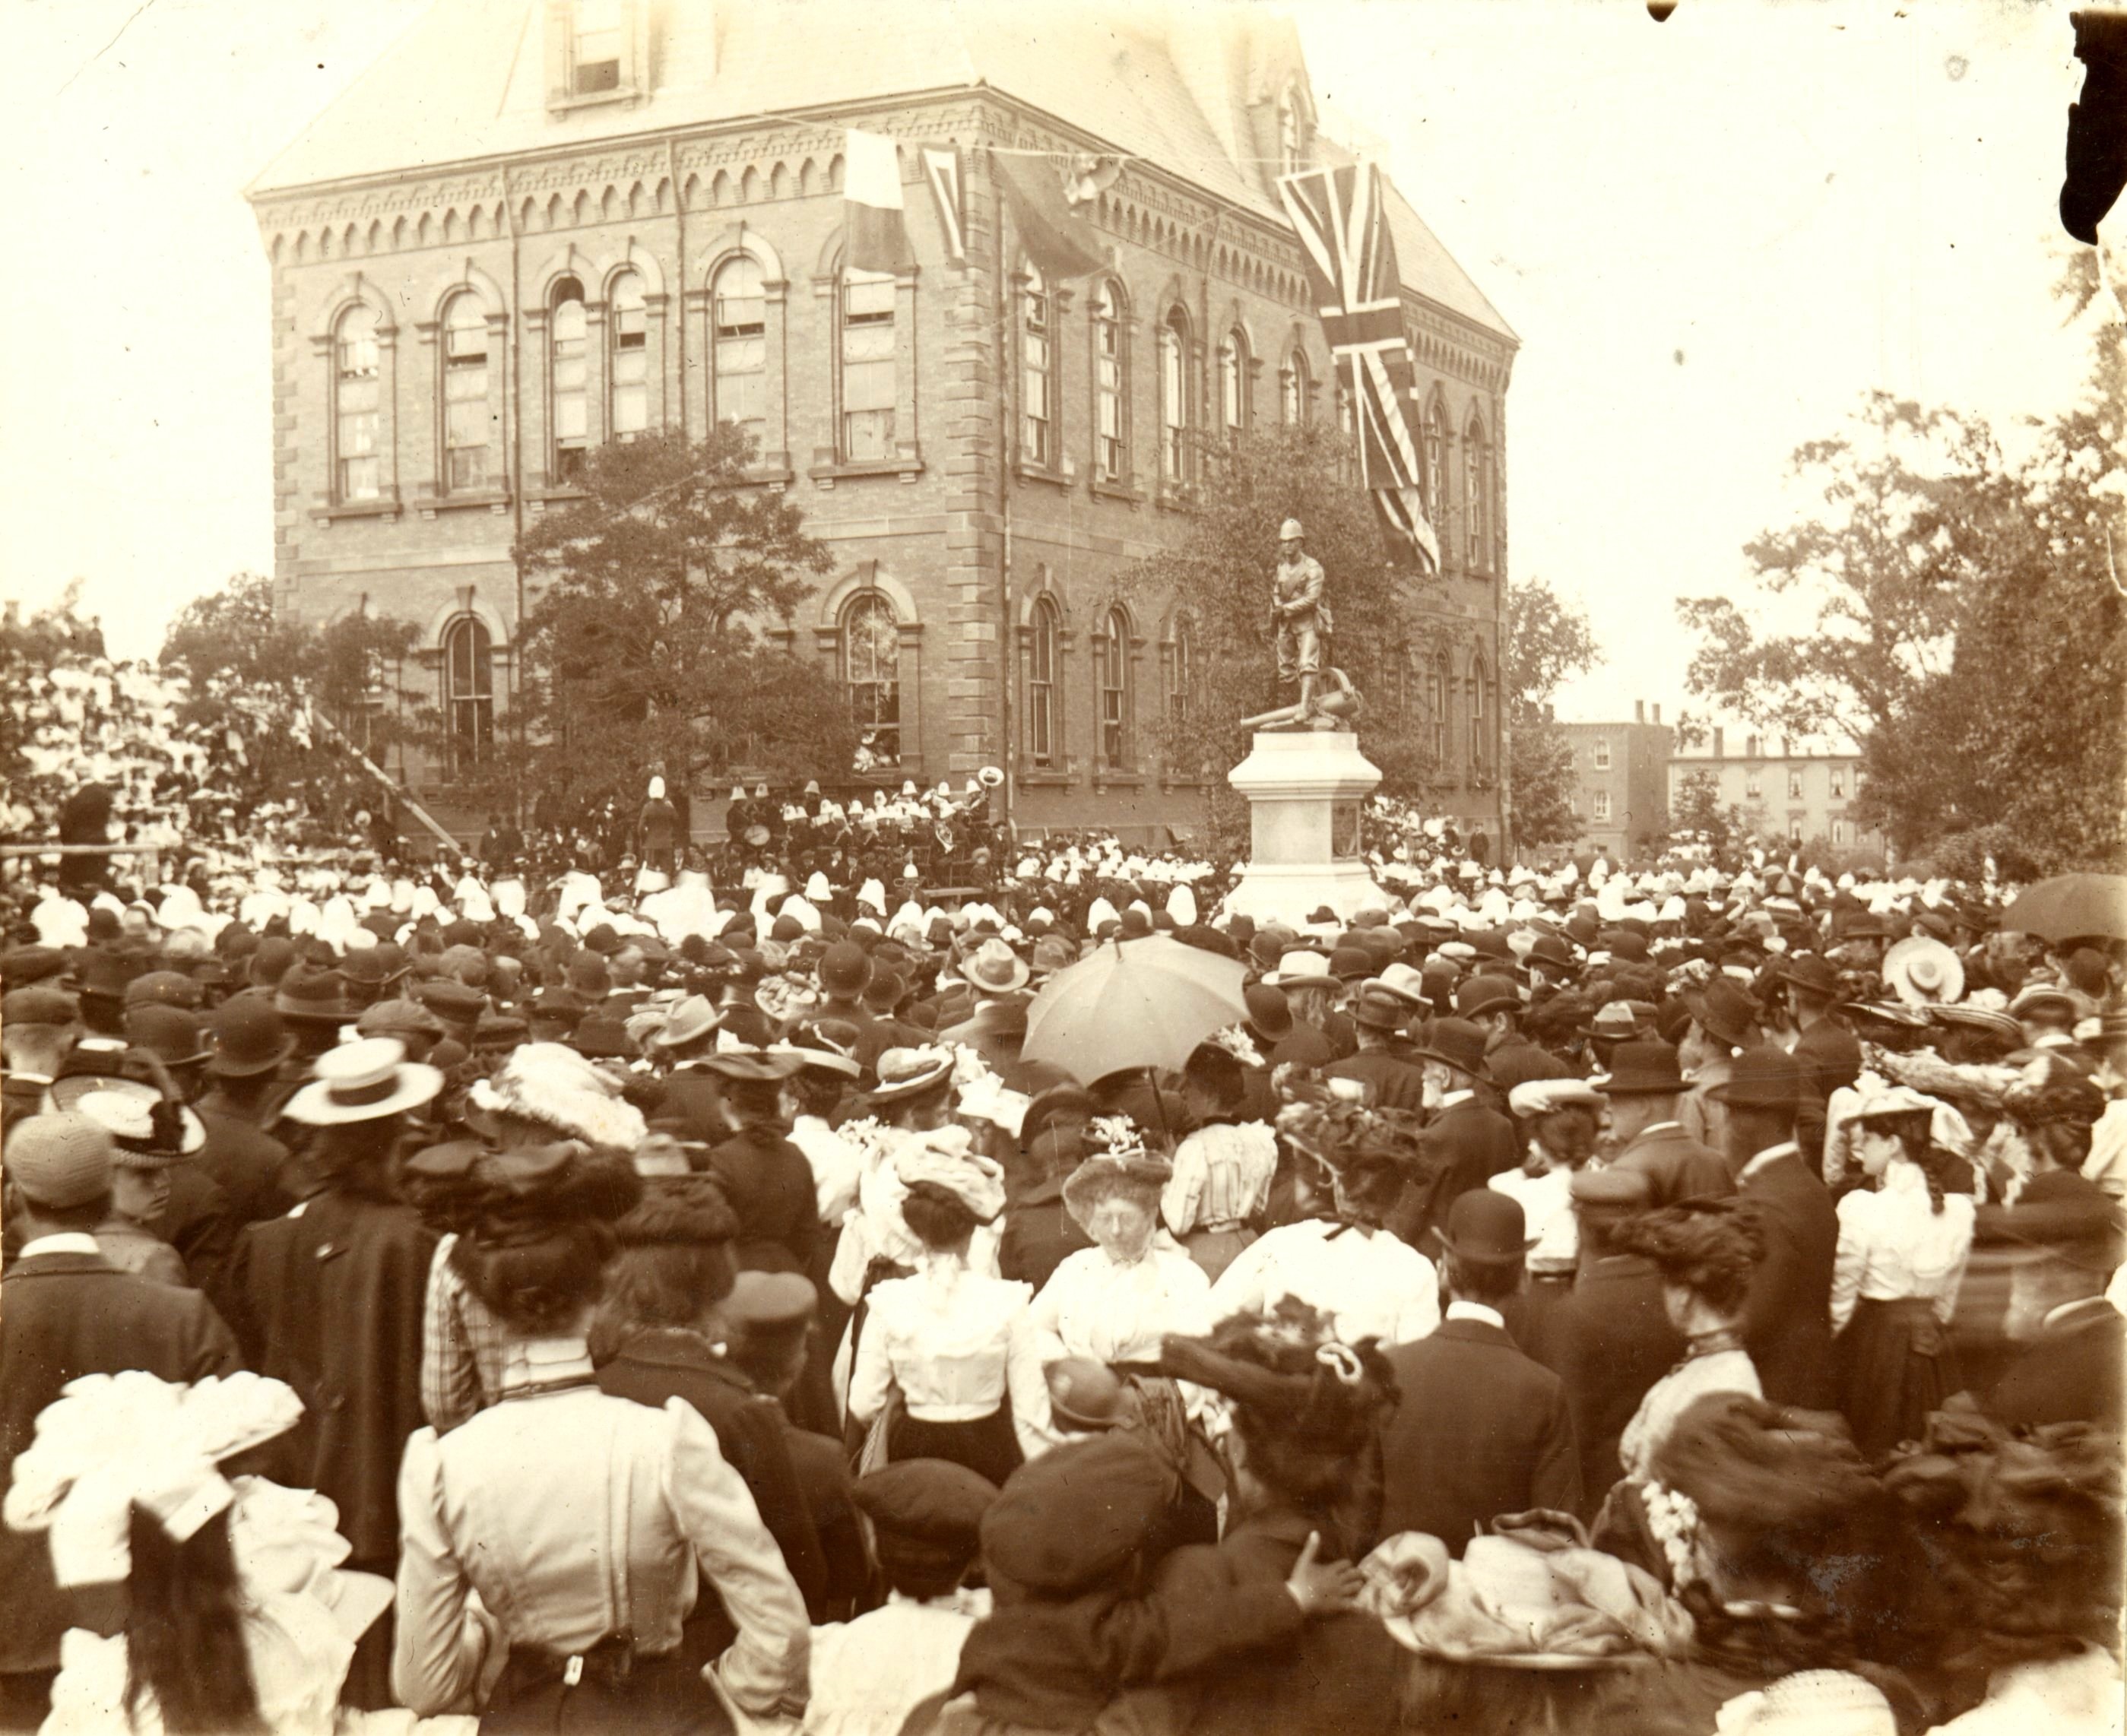 Unveiling, July 6, 1903.